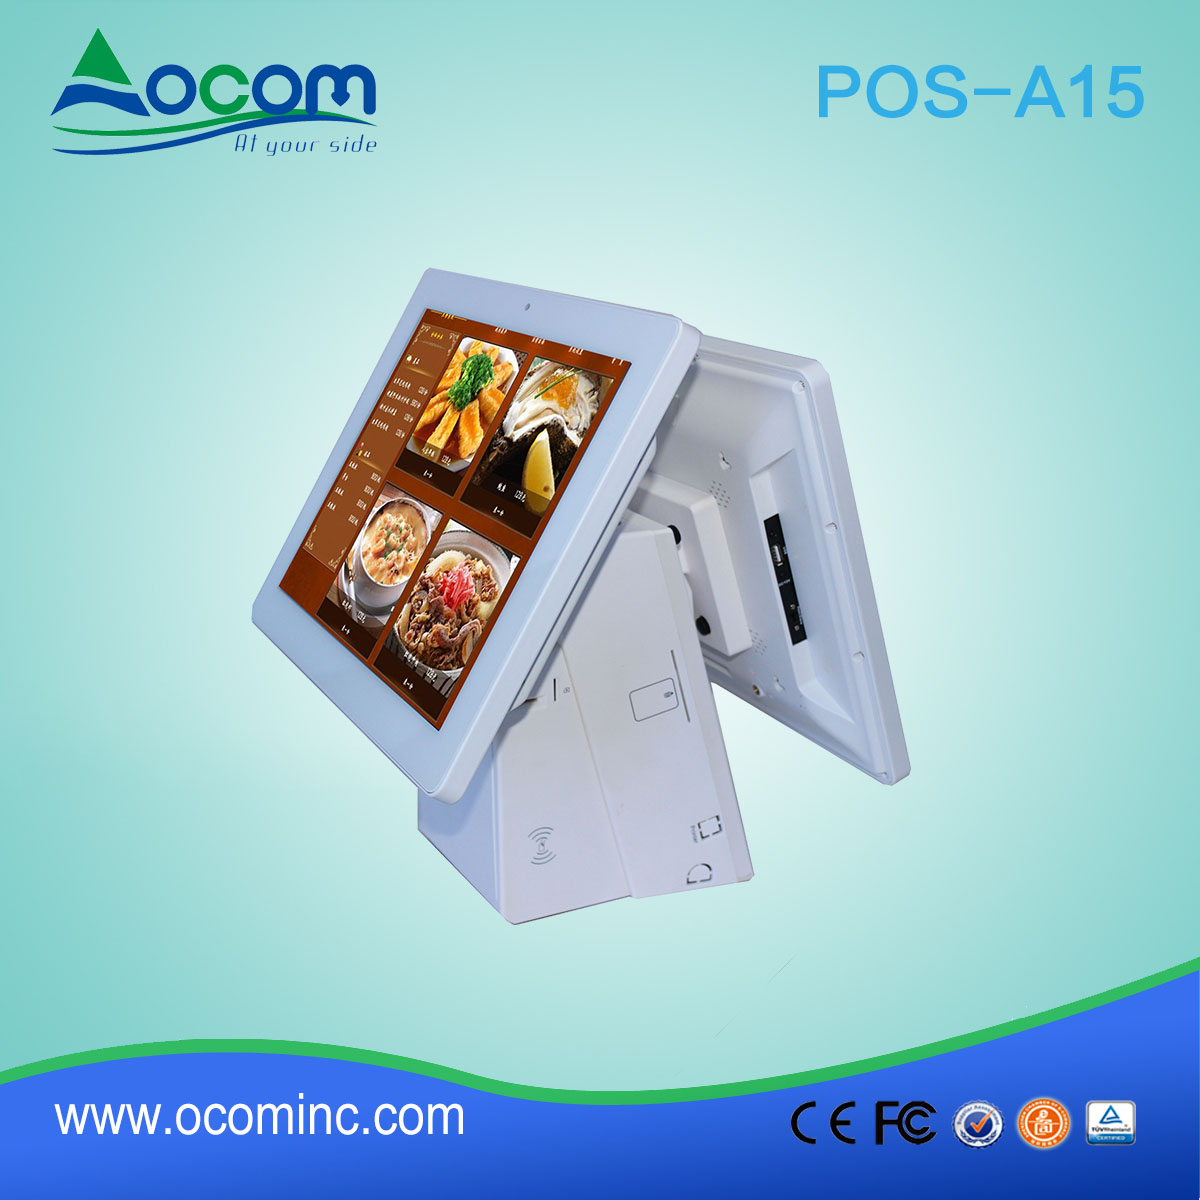 (POS-A15) Windows \/ Android Touch screen POS Terminal mit 58mm \/ 80mm Thermodrucker